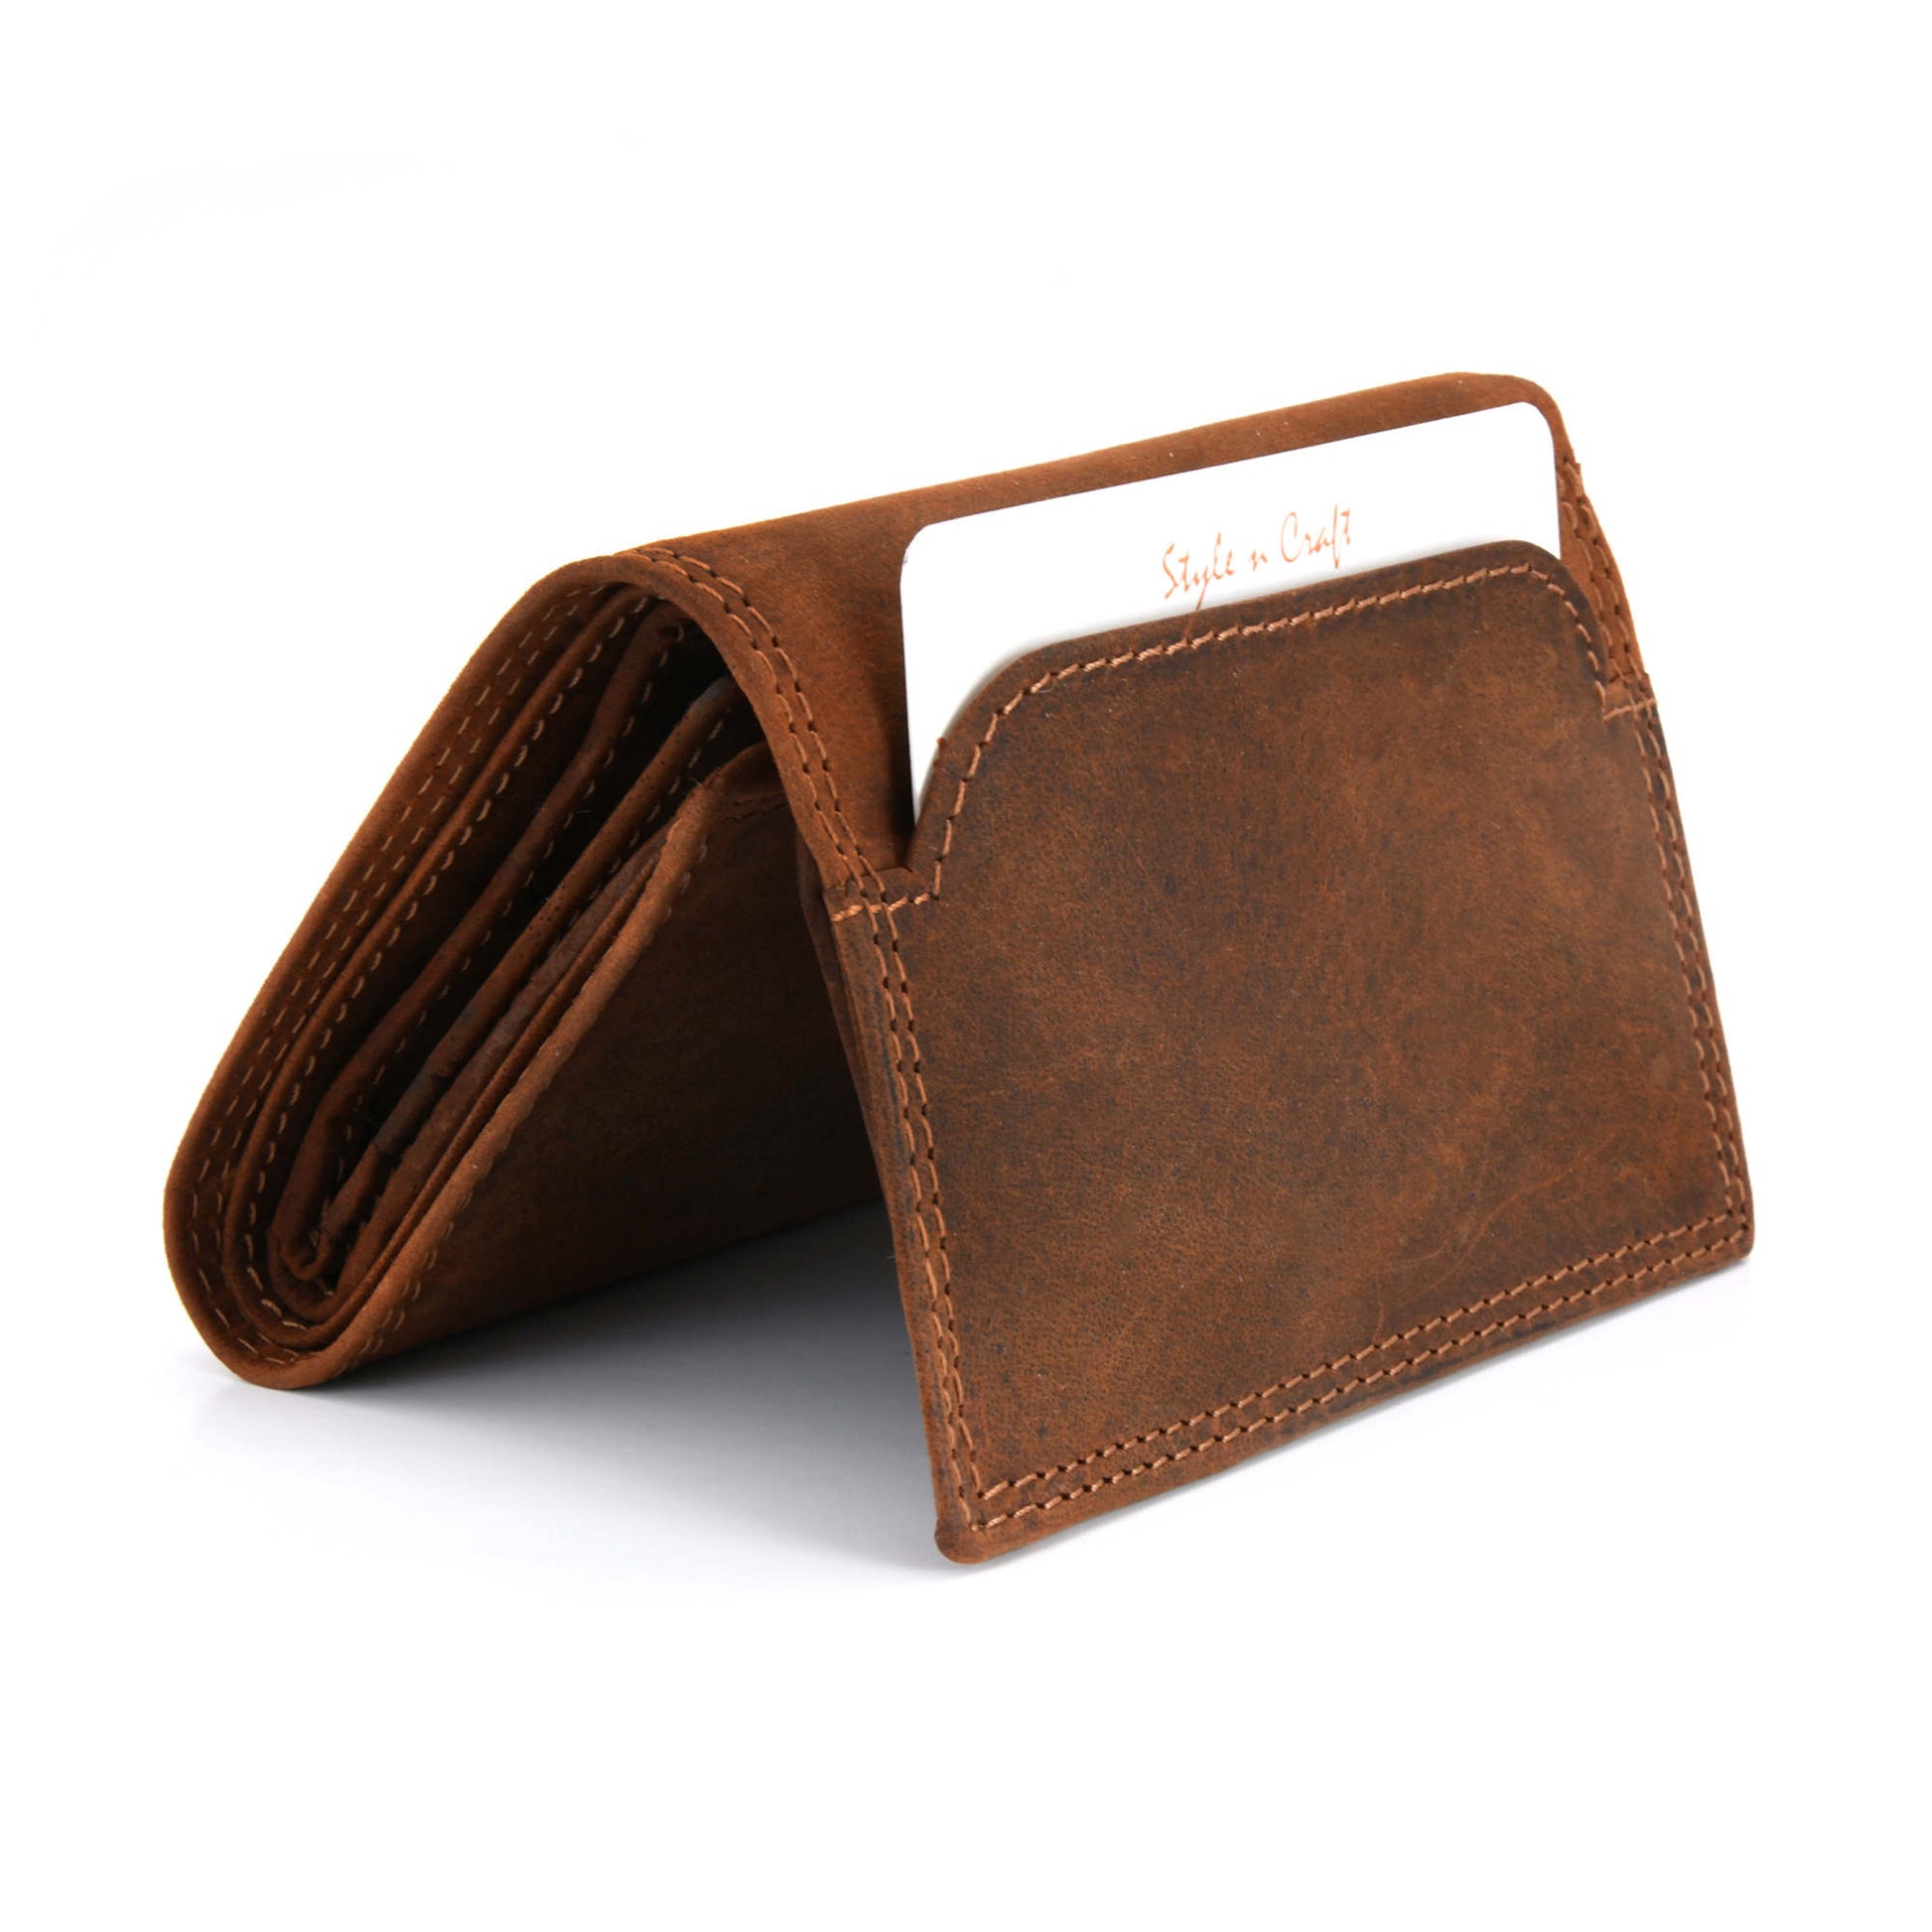 Style n Craft 300790-BR Trifold Wallet in Leather - brown color - closed view - front angled view showing outside pocket